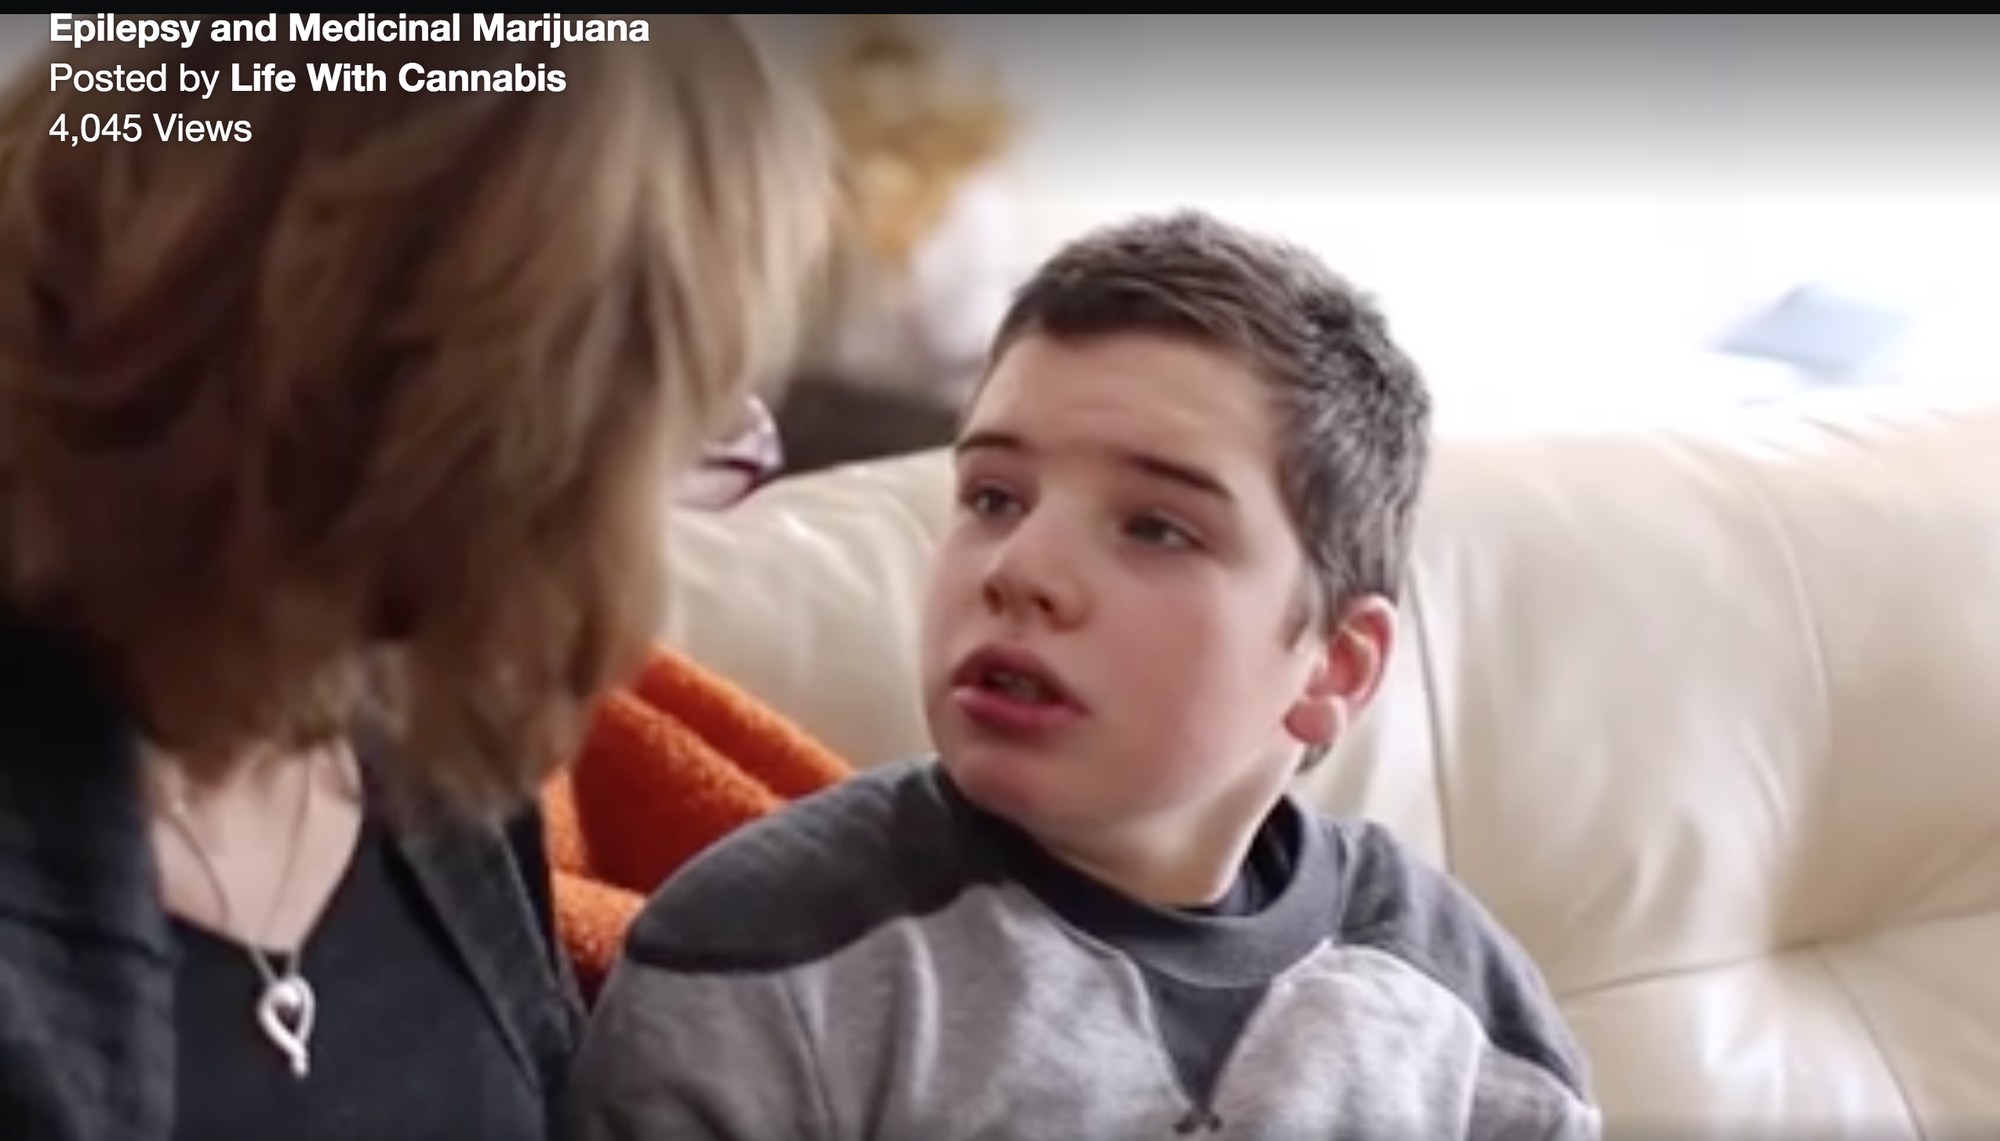 Hear This Mom's Heartbreaking Plea Asking President Obama To Reschedule Cannabis